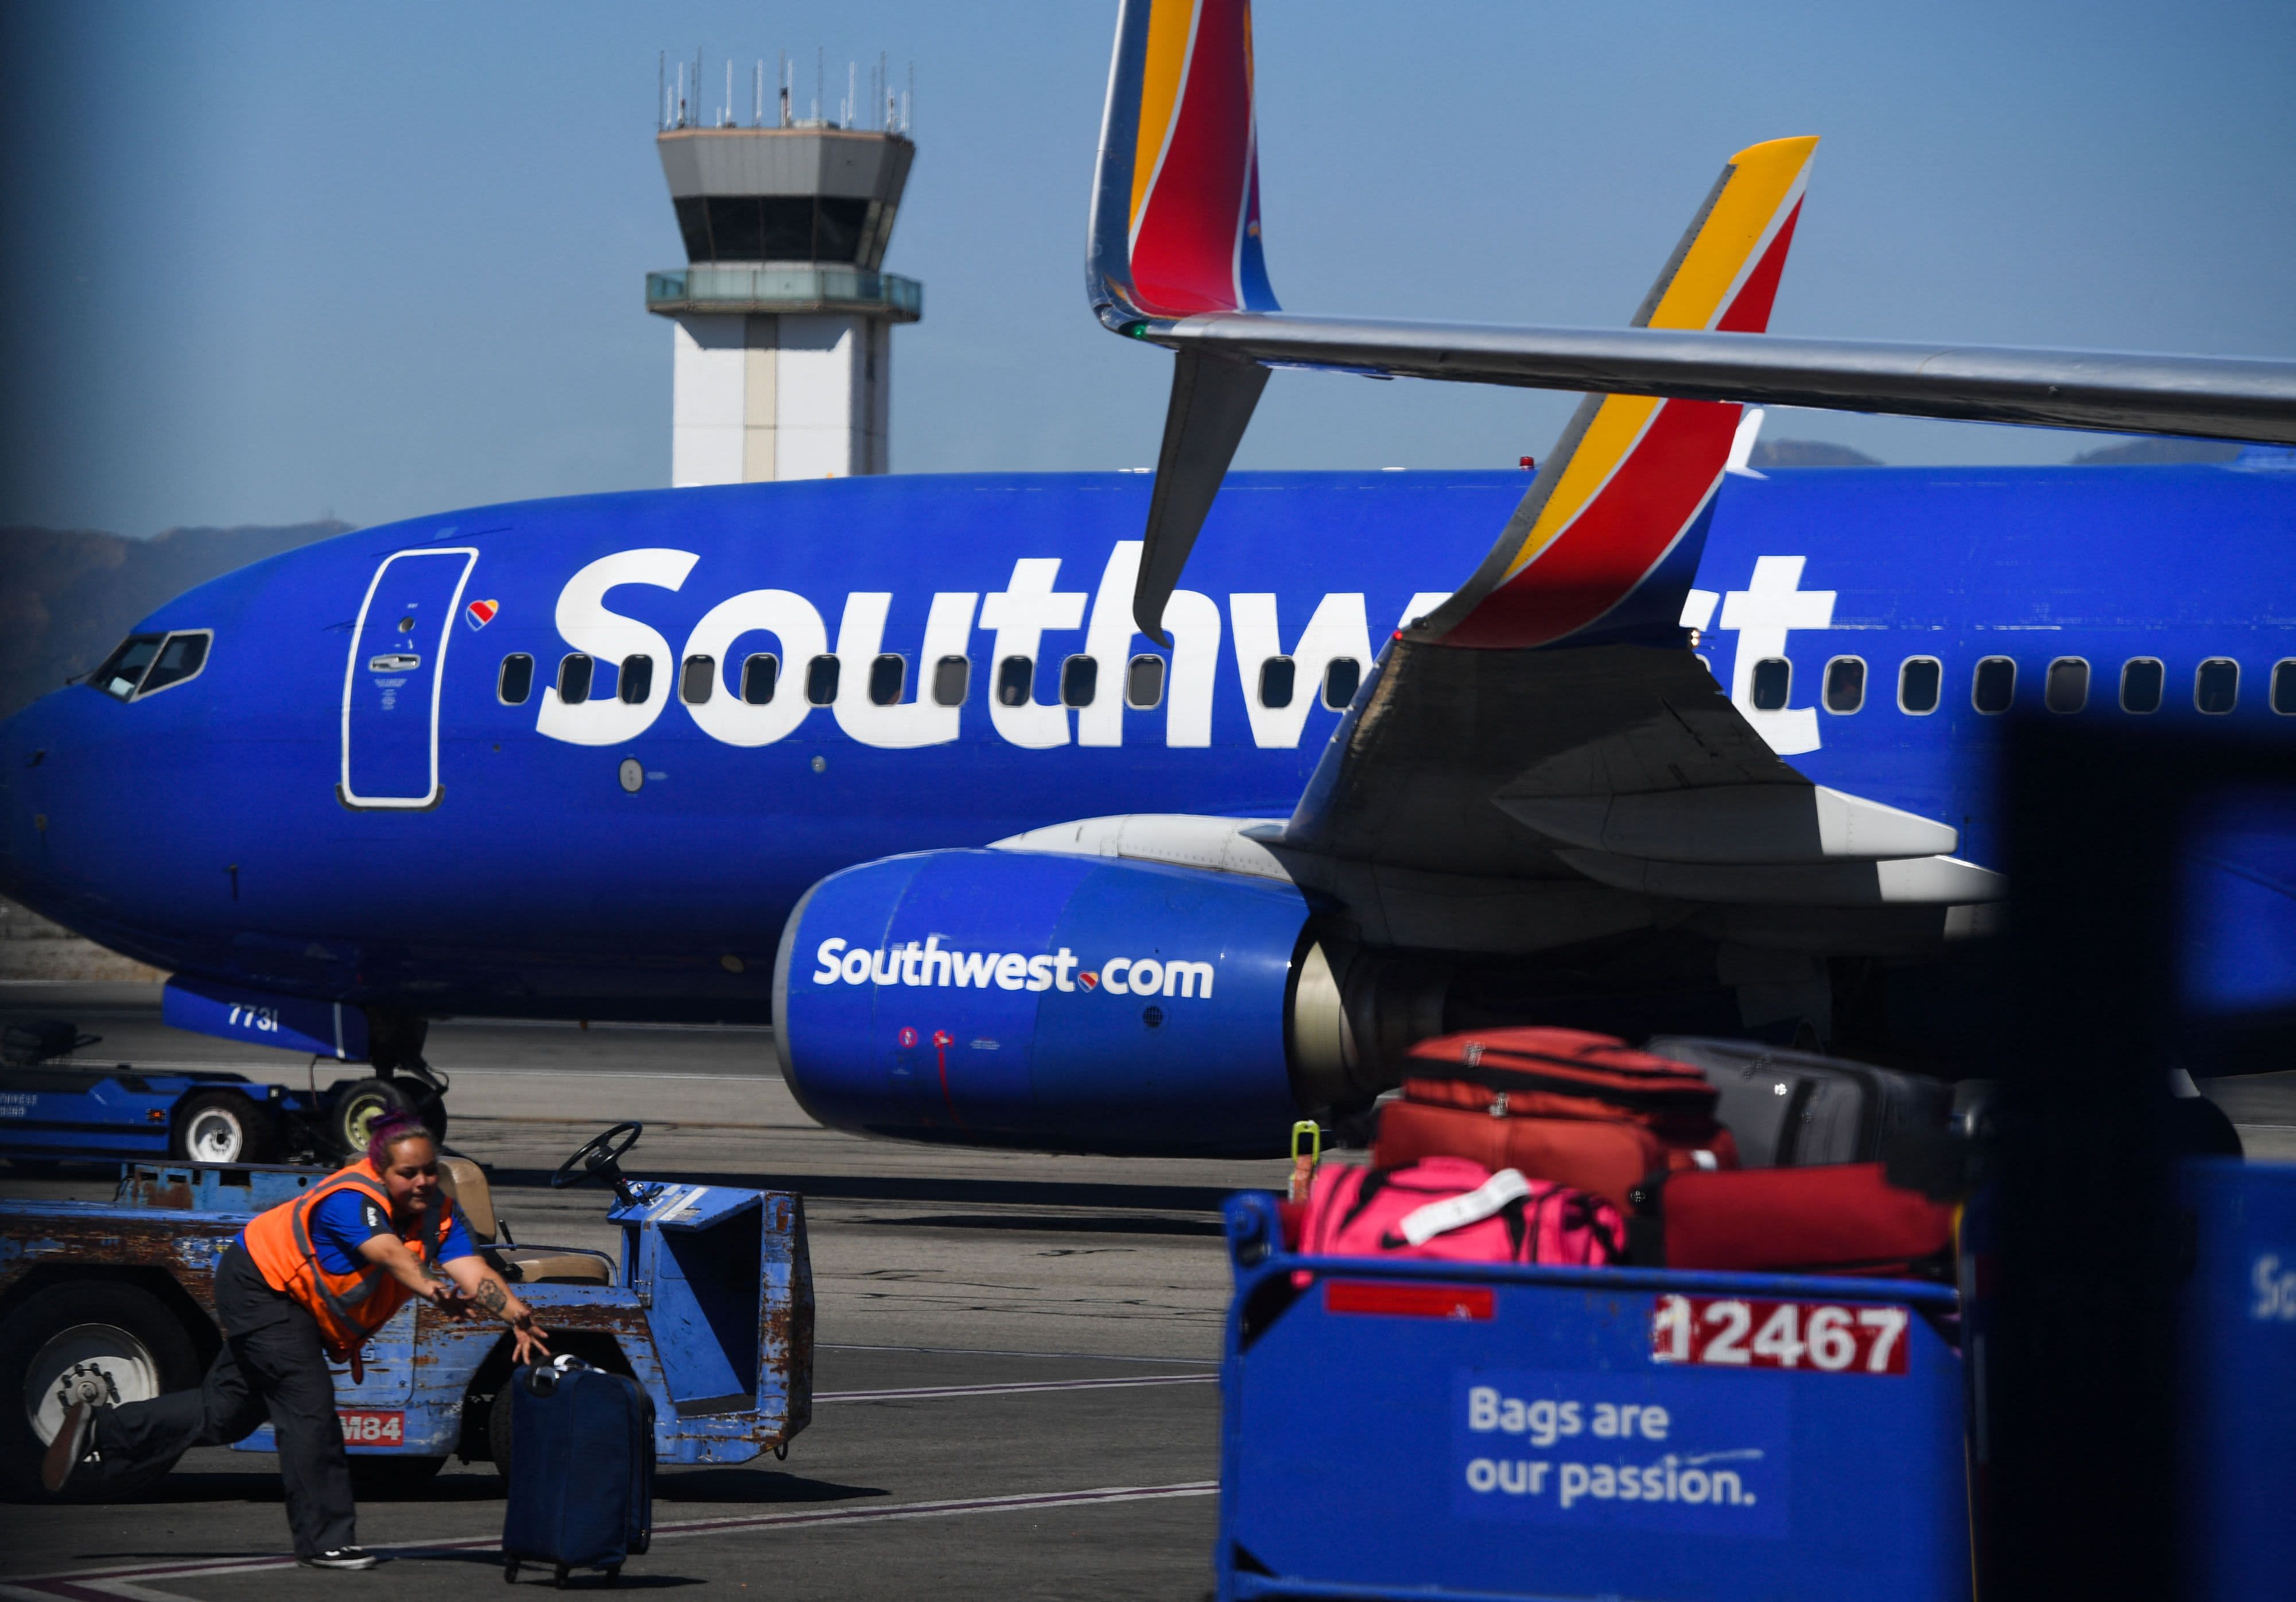 Southwest offers employees extra pay, frequent flights to avoid holiday interruptions